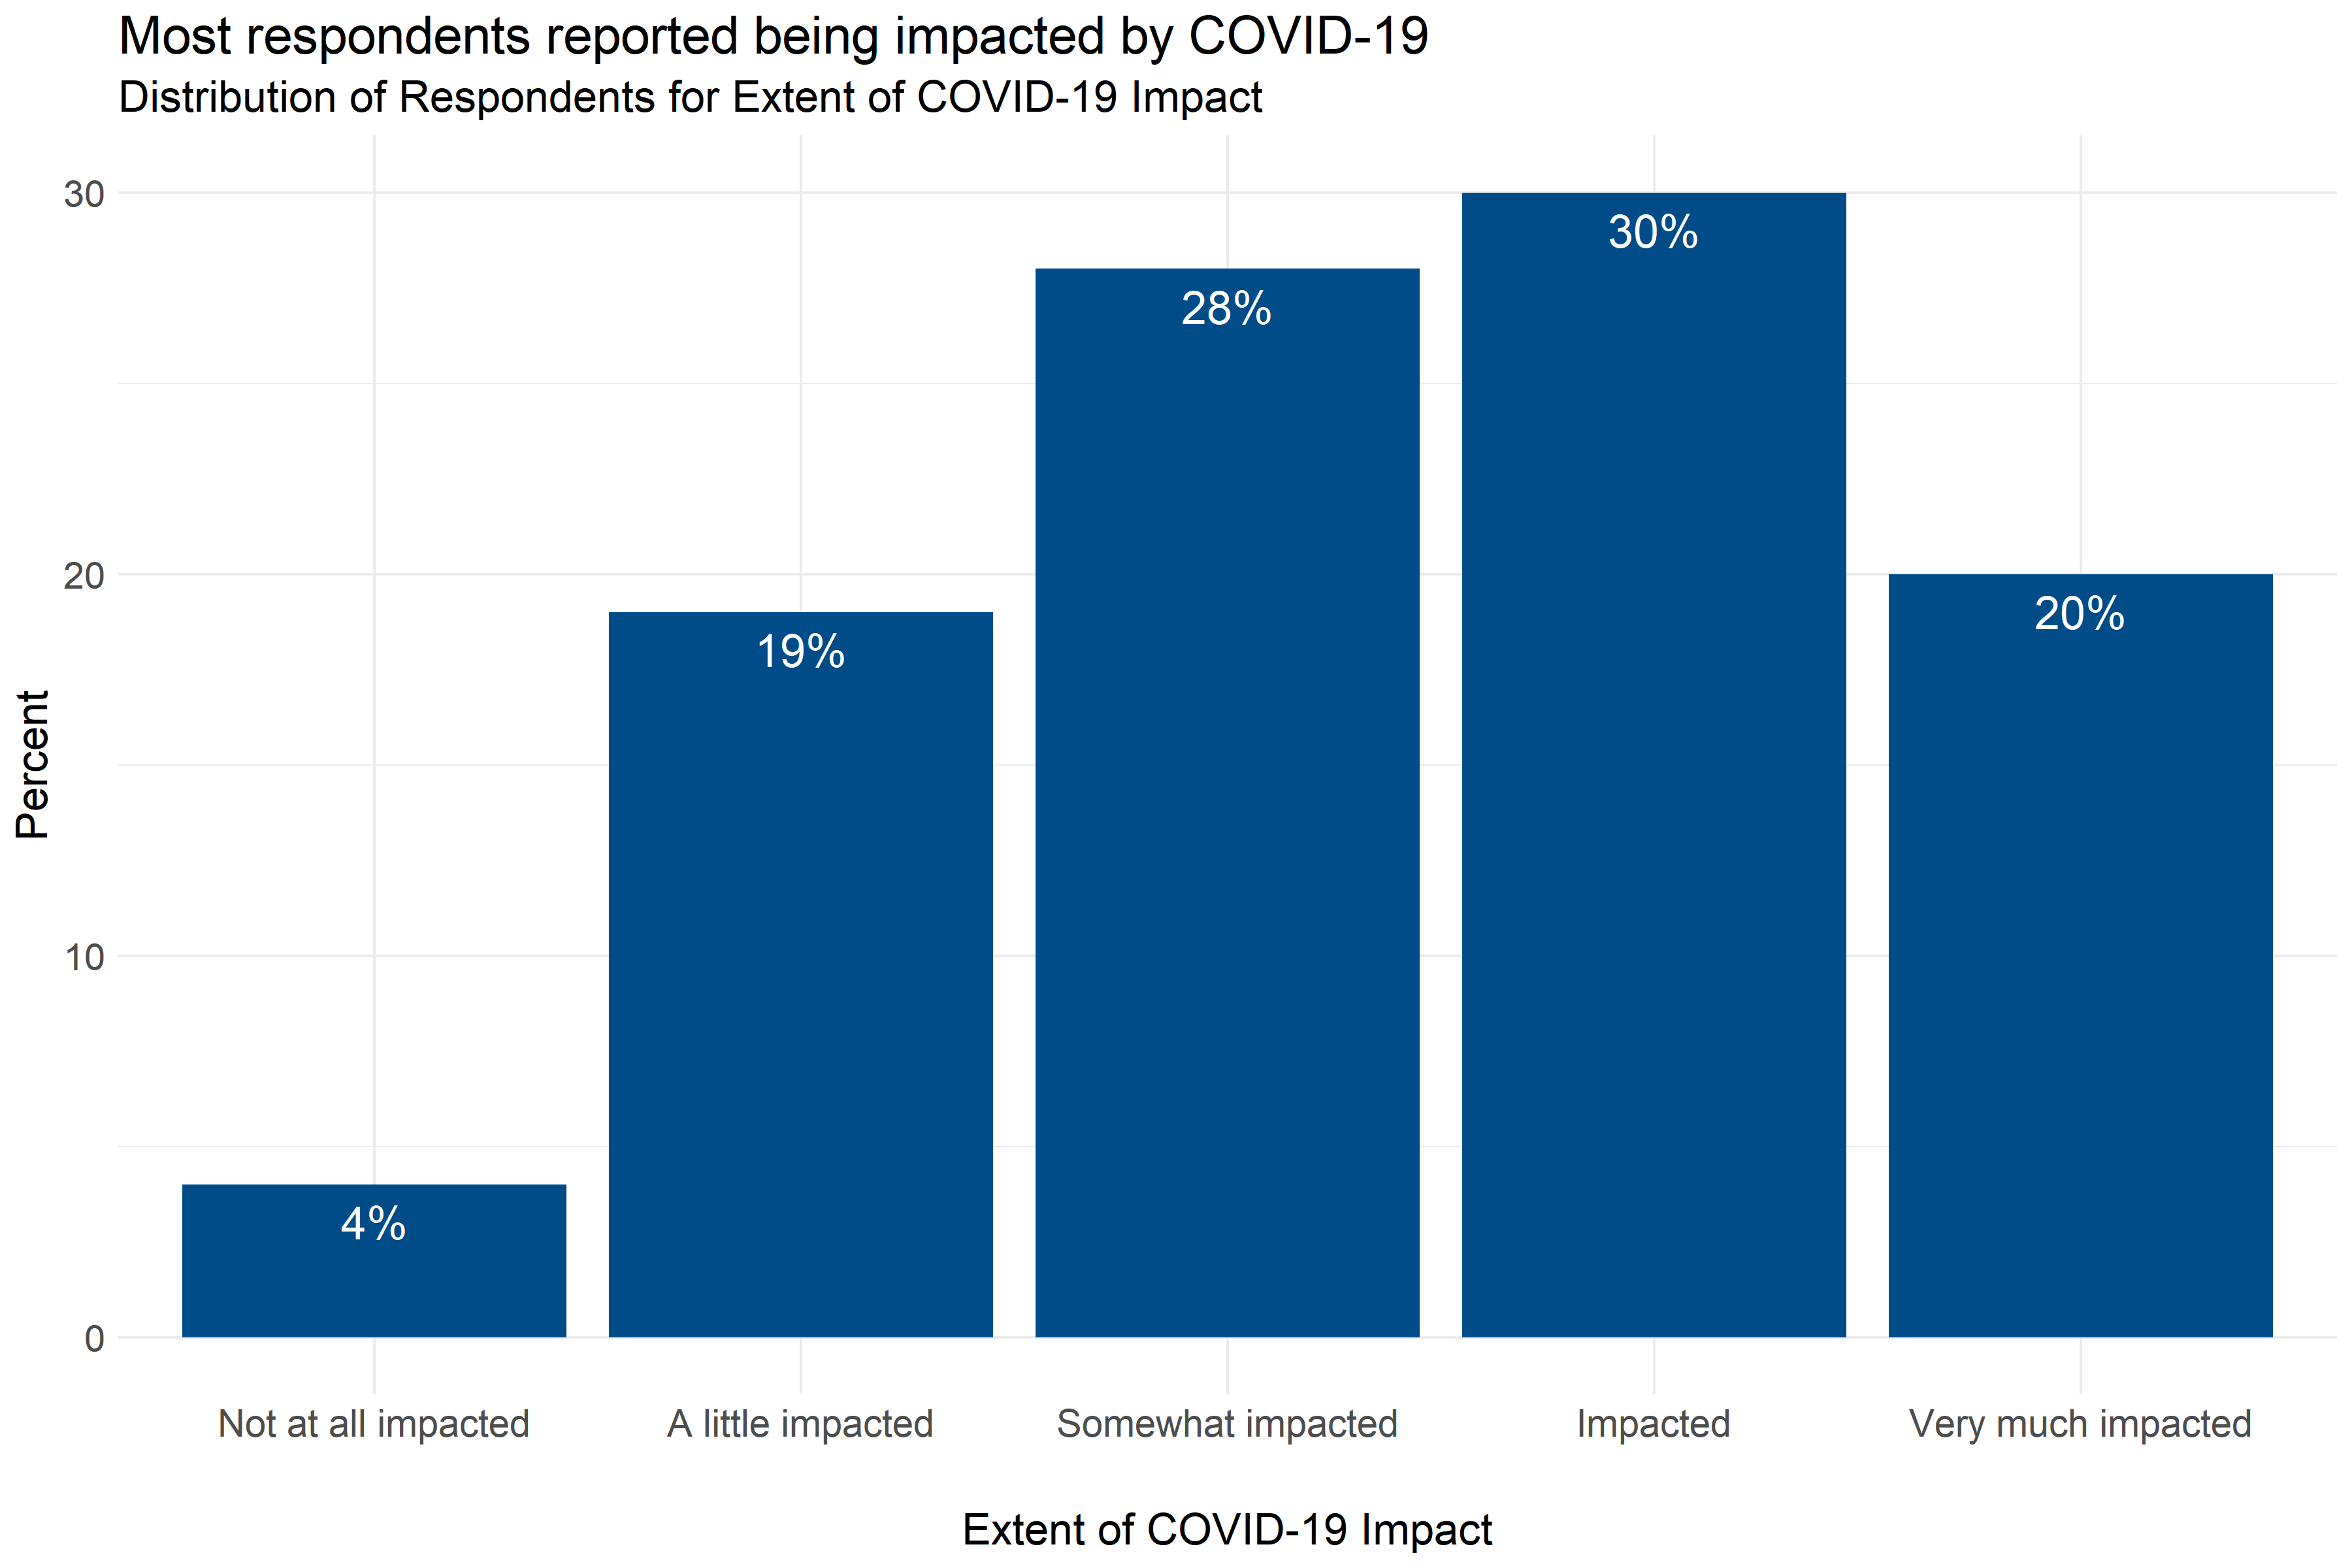 Distribution of responses about the extent to which COVID-19 has impacted respondents